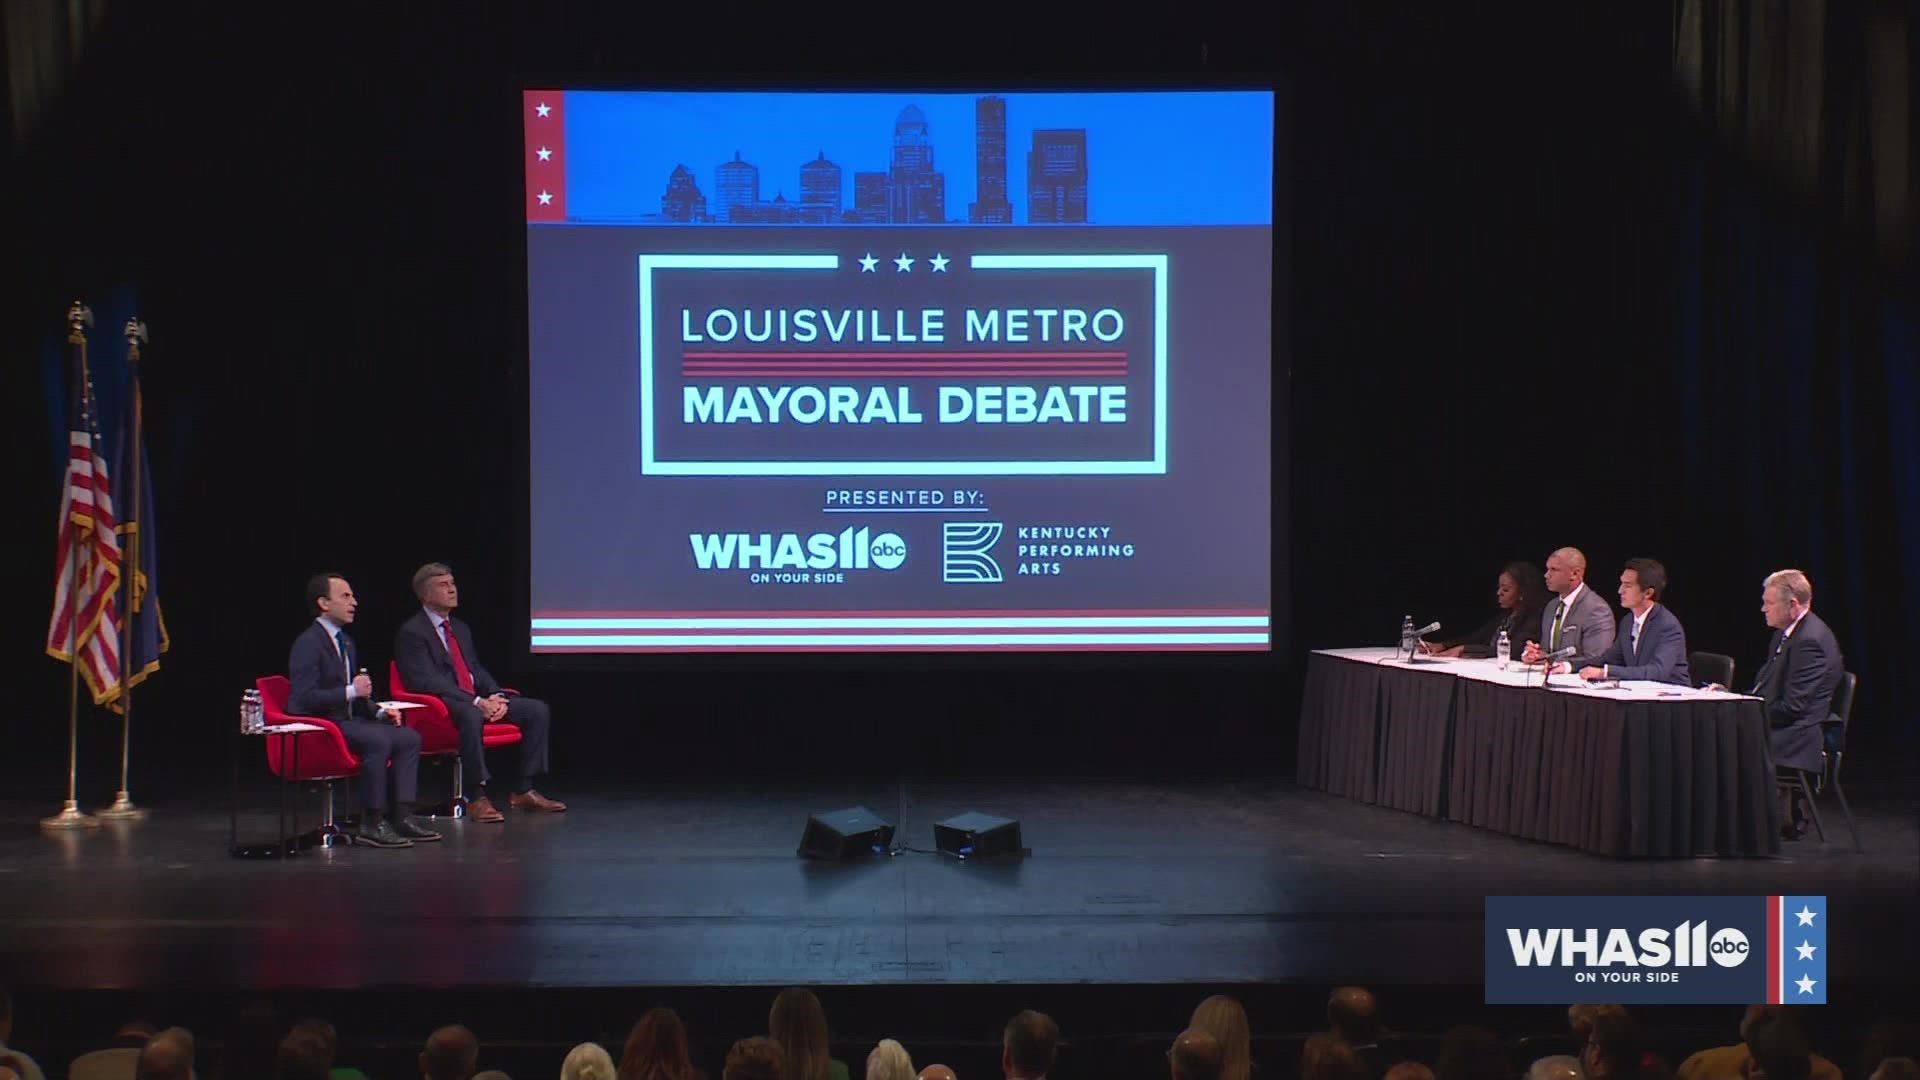 This is the last mayoral debate candidates Bill Dieruf and Craig Greenberg participated in before elections on Nov. 8.